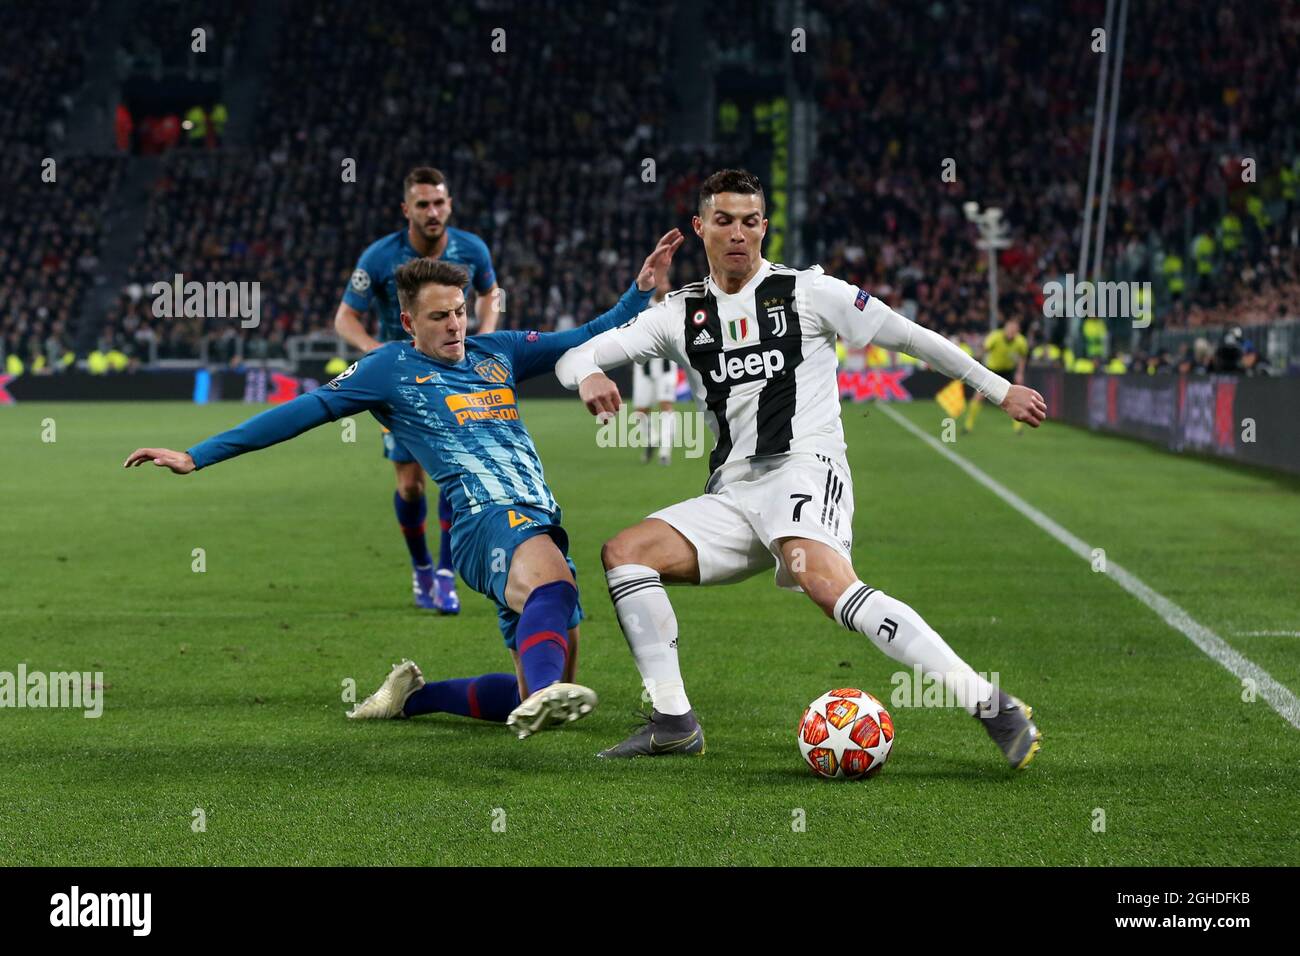 Cristiano Ronaldo of Juventus and Santiago Arias of Atletico Madrid during the UEFA Champions League Round of 16 match at the Allianz Stadium, Turin, Italy. Picture date 12th March 2019. Picture credit should read: Jonathan Moscrop/Sportimage via PA Images Stock Photo